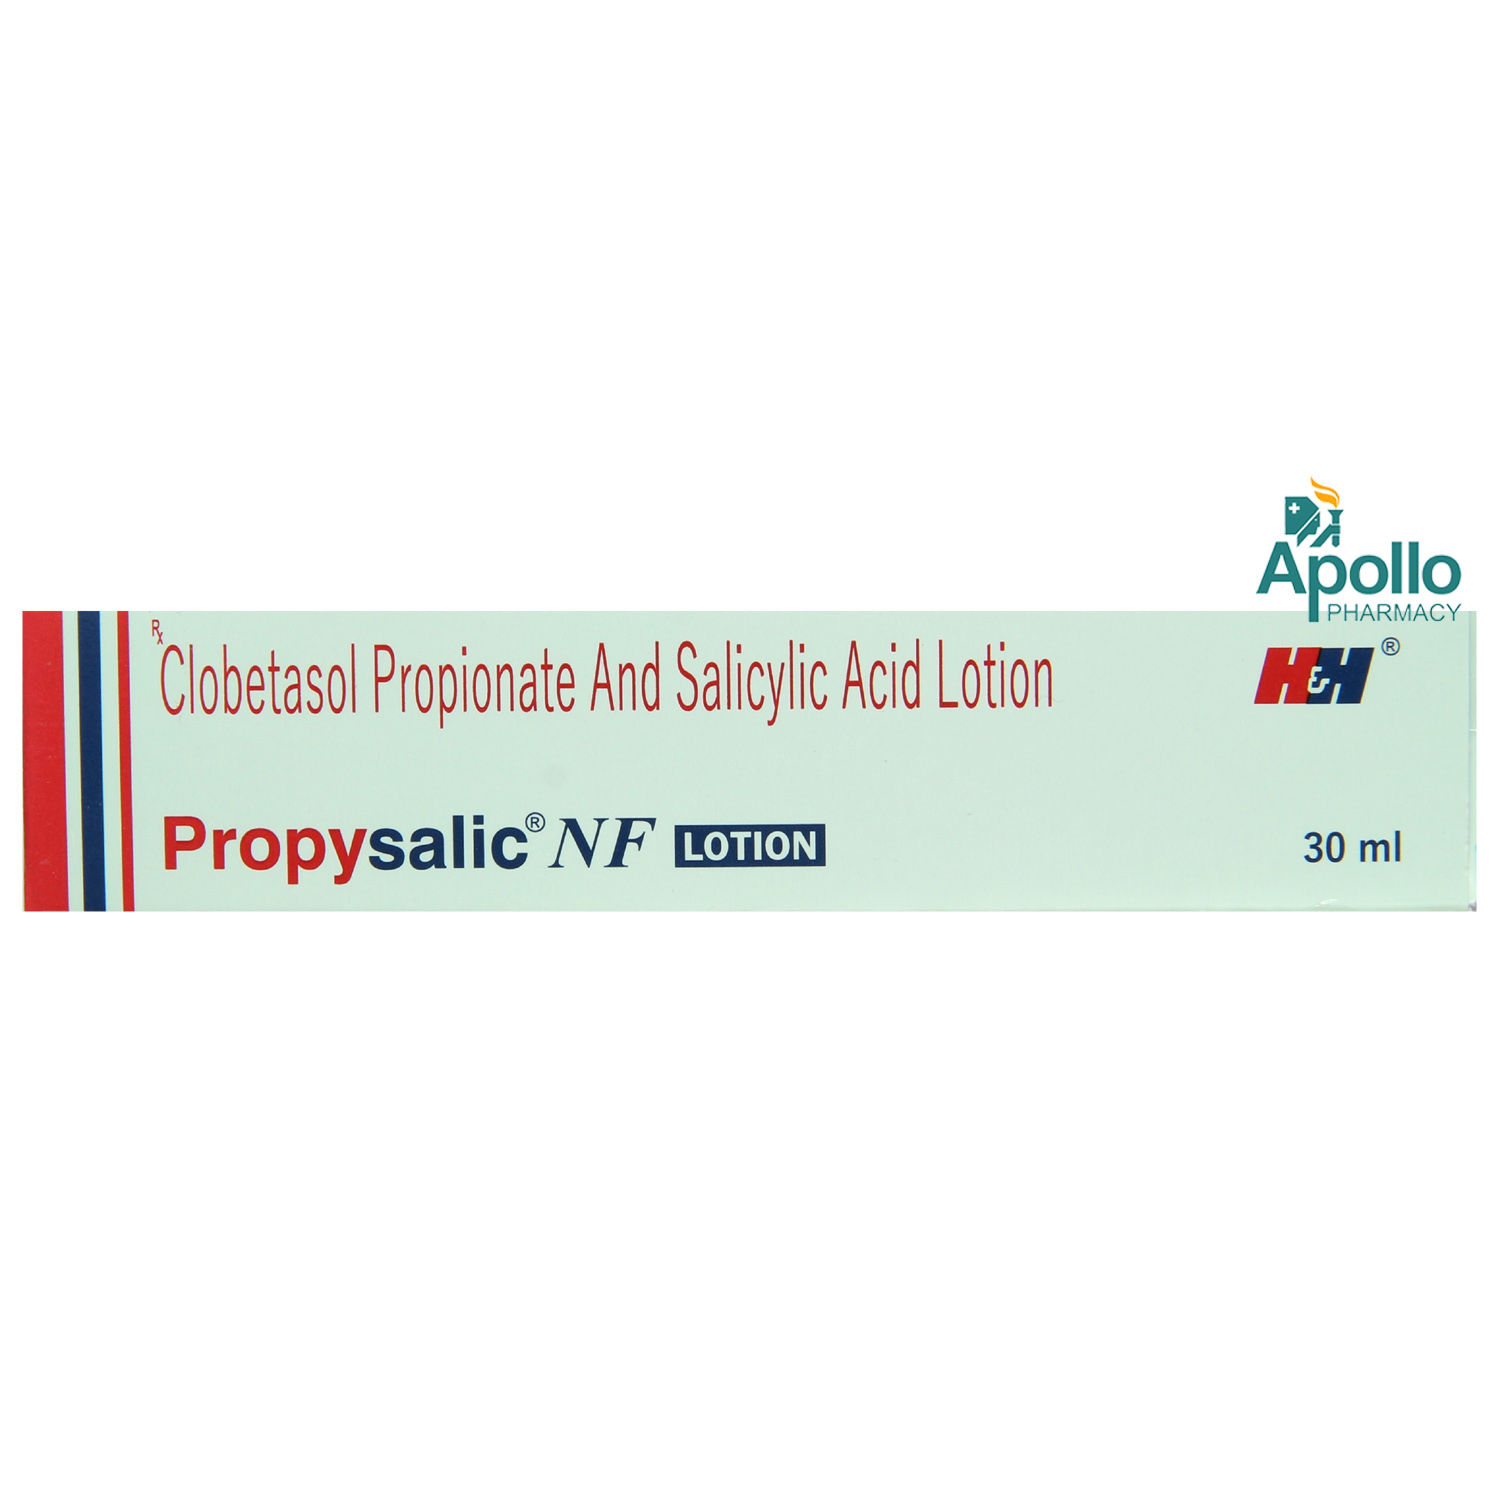 Propysalic NF Lotion 30 ml, Pack of 1 LOTION